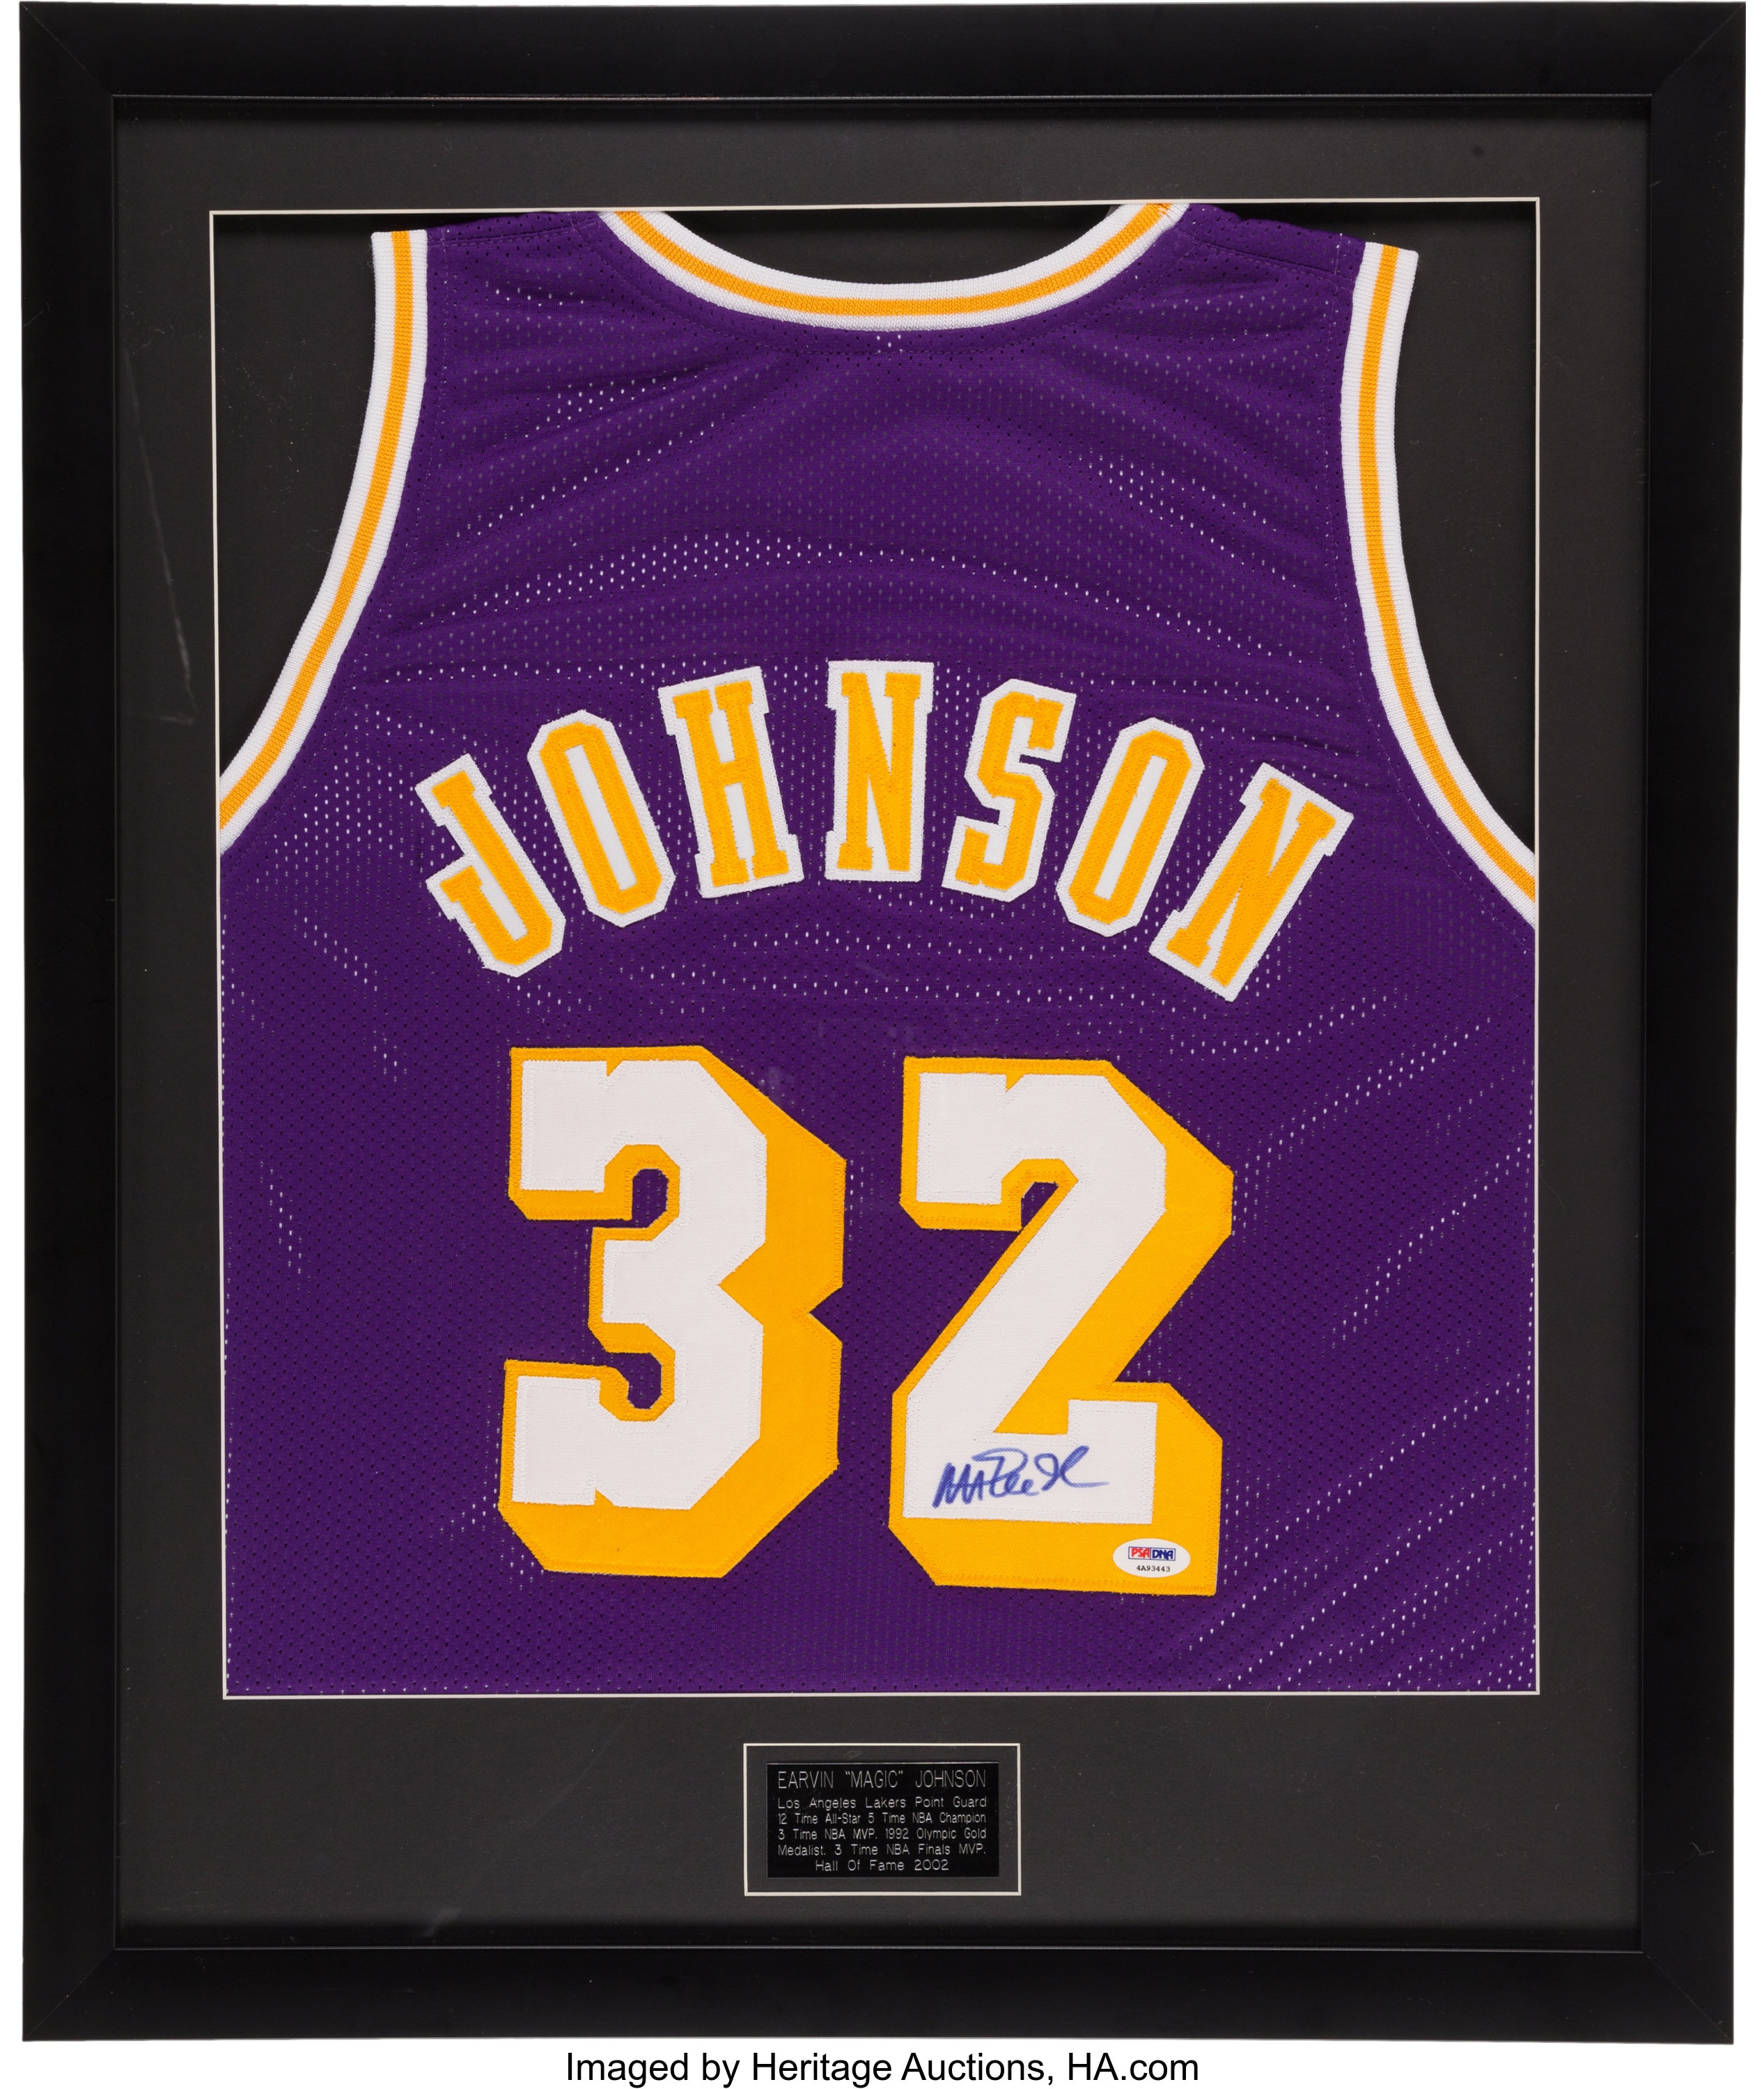 Sold at Auction: Magic Johnson Signed Jersey Framed PSA/DNA Certified